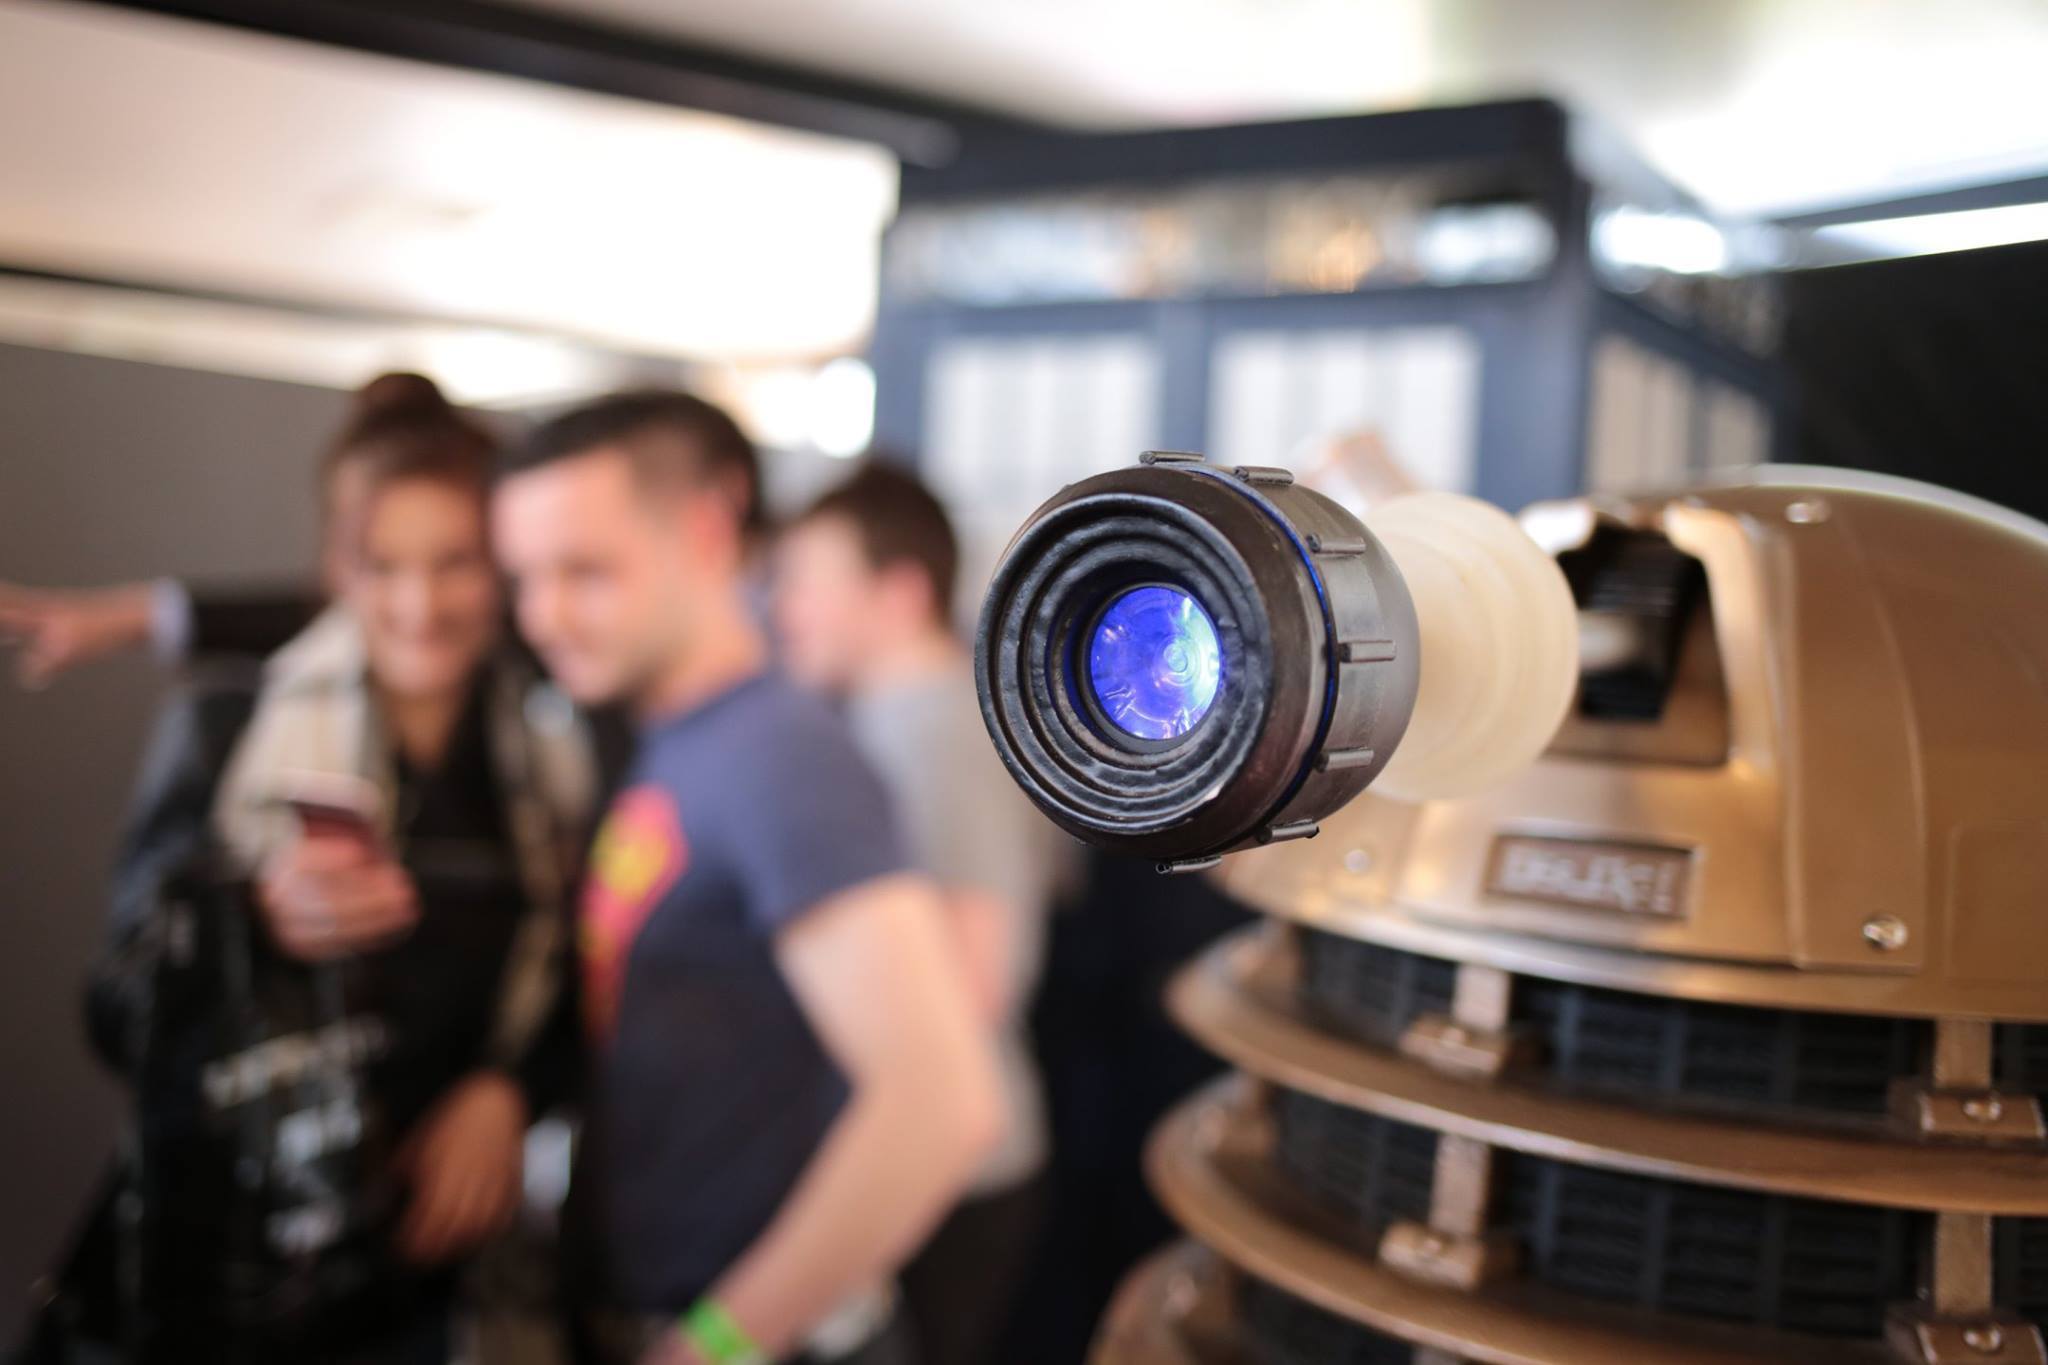 A dalek on show at Dunfermline Comic Con